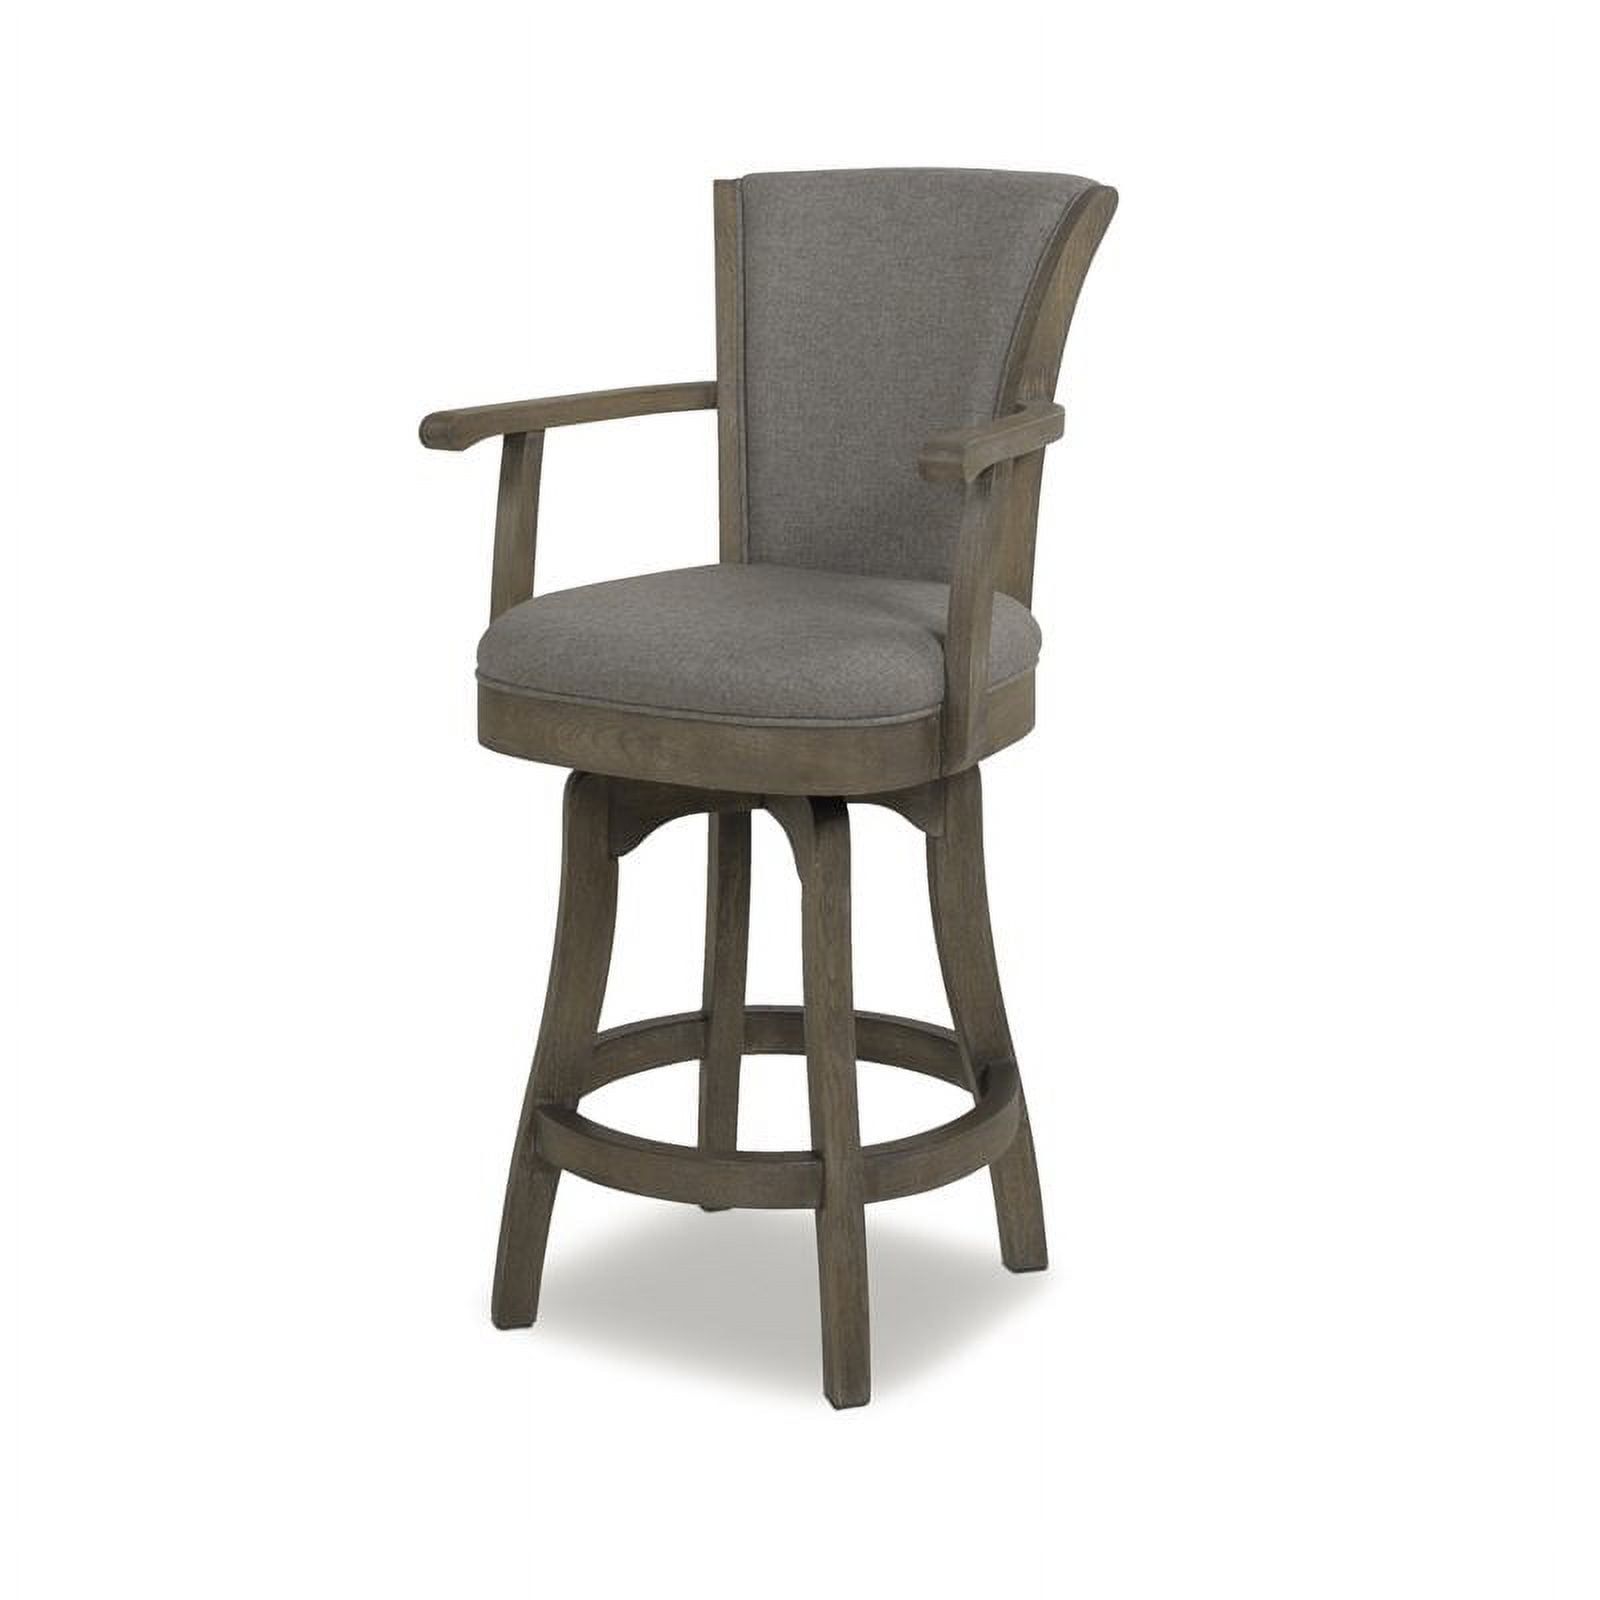 Vintage Chic Gray Leather & Oak Swivel Bar Stool with Brass Accents